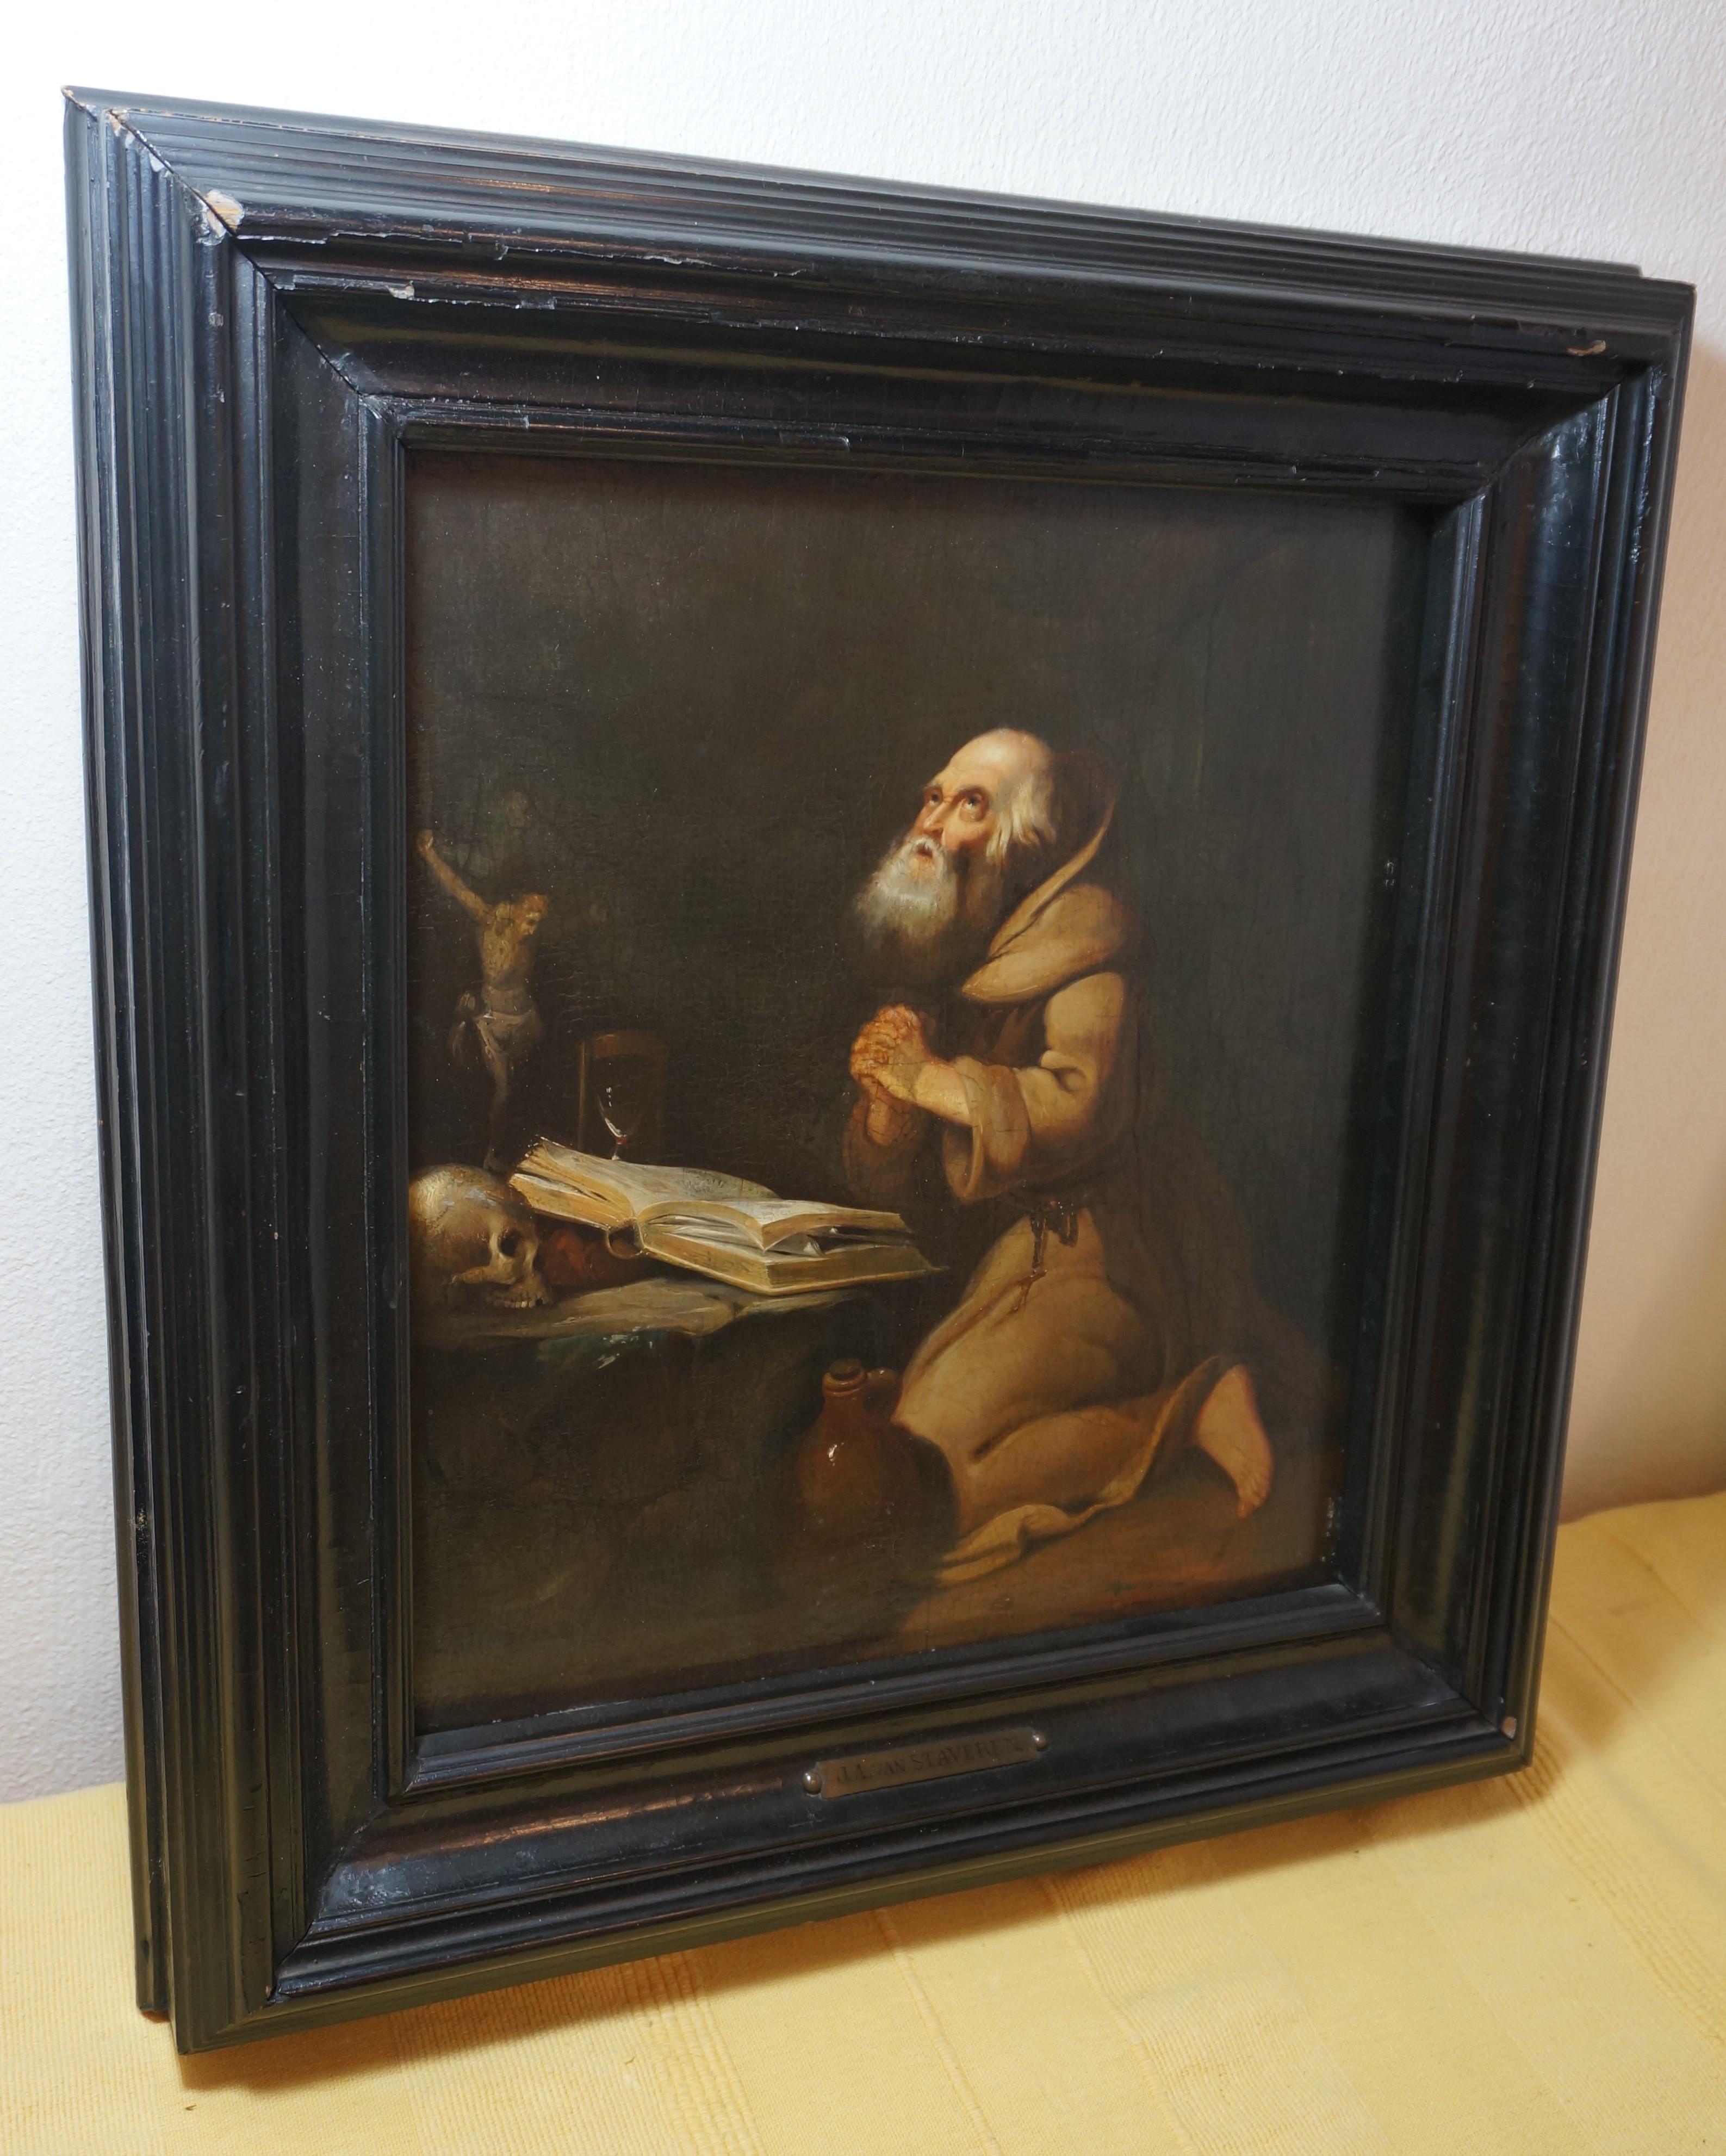 Antique religious painting, Praying hermit, oil on panel, Dutch golden age 6